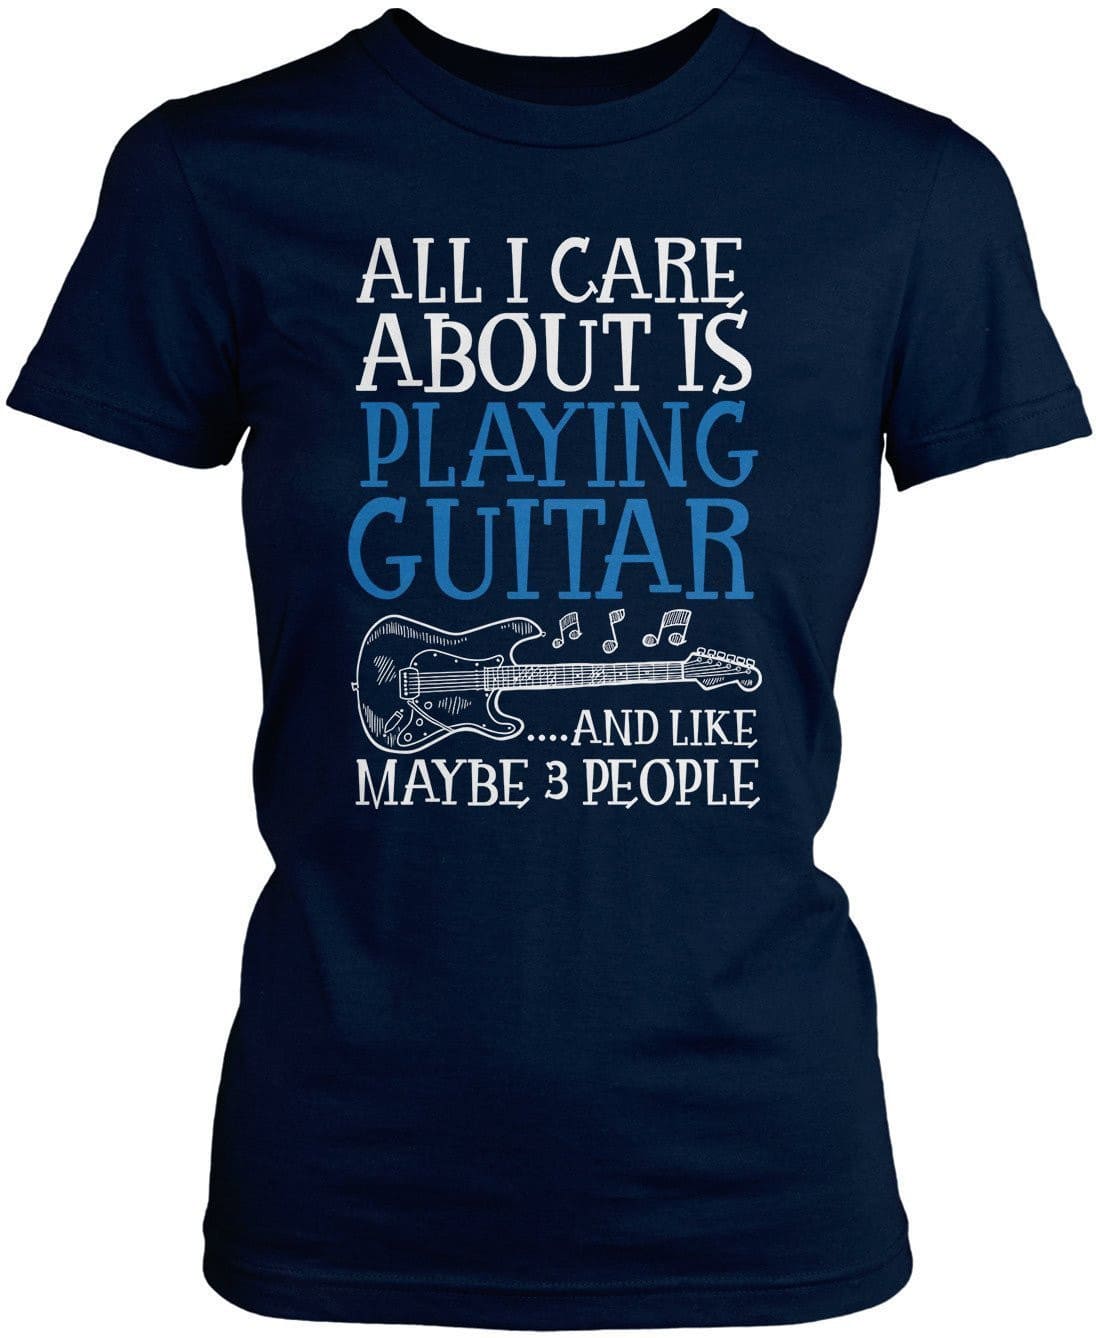 All I Care About is Playing Guitar T-Shirt